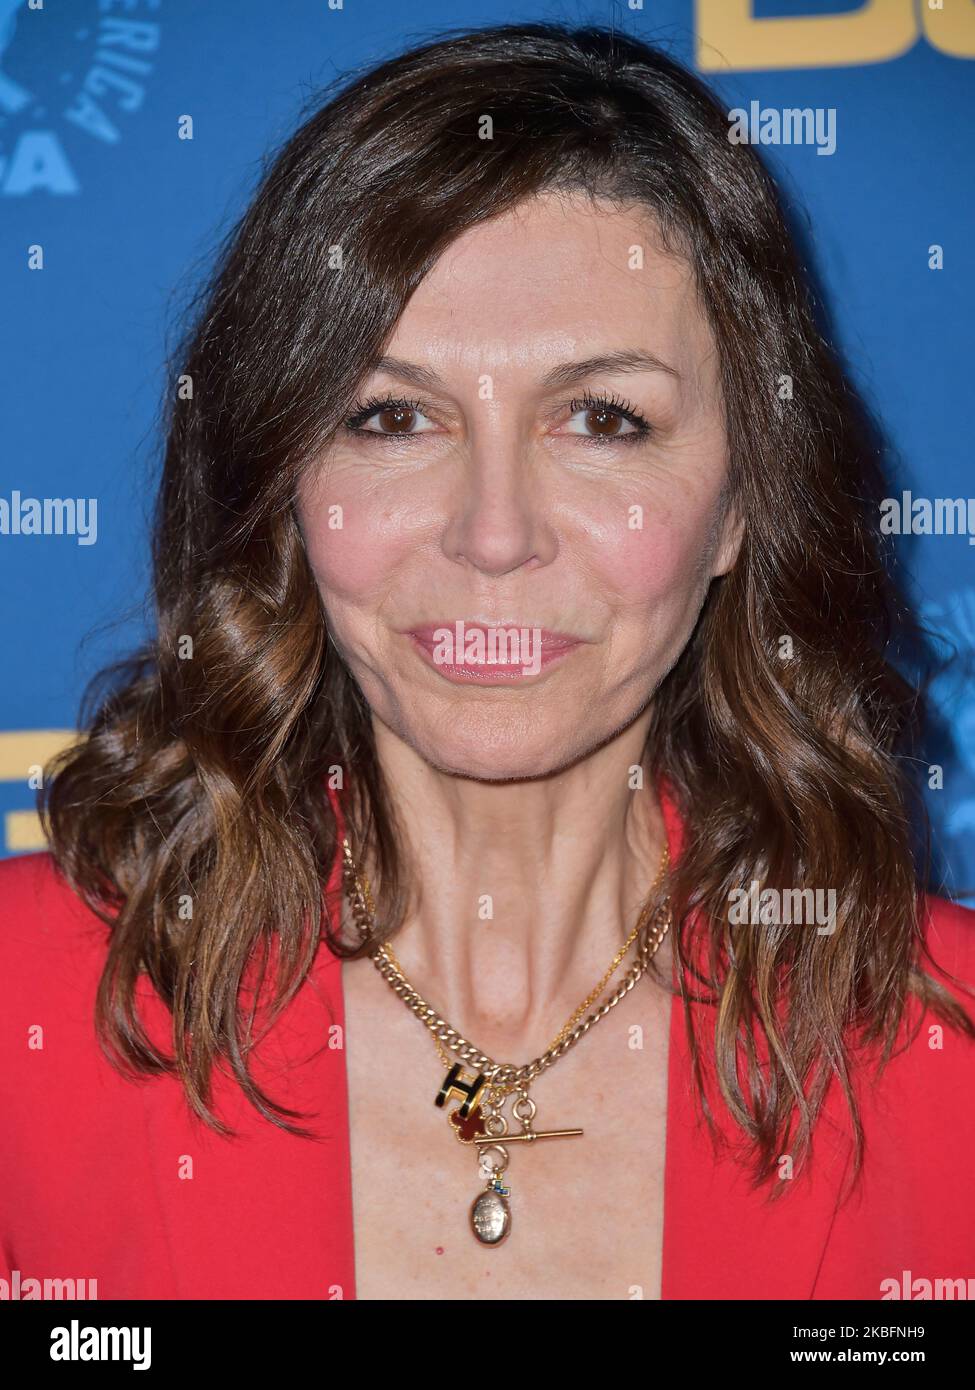 LOS ANGELES, CALIFORNIA, USA - JANUARY 25: Finola Hughes arrives at the 72nd Annual Directors Guild Of America Awards held at The Ritz-Carlton Hotel at L.A. Live on January 25, 2020 in Los Angeles, California, United States. (Photo by Image Press Agency/NurPhoto) Stock Photo